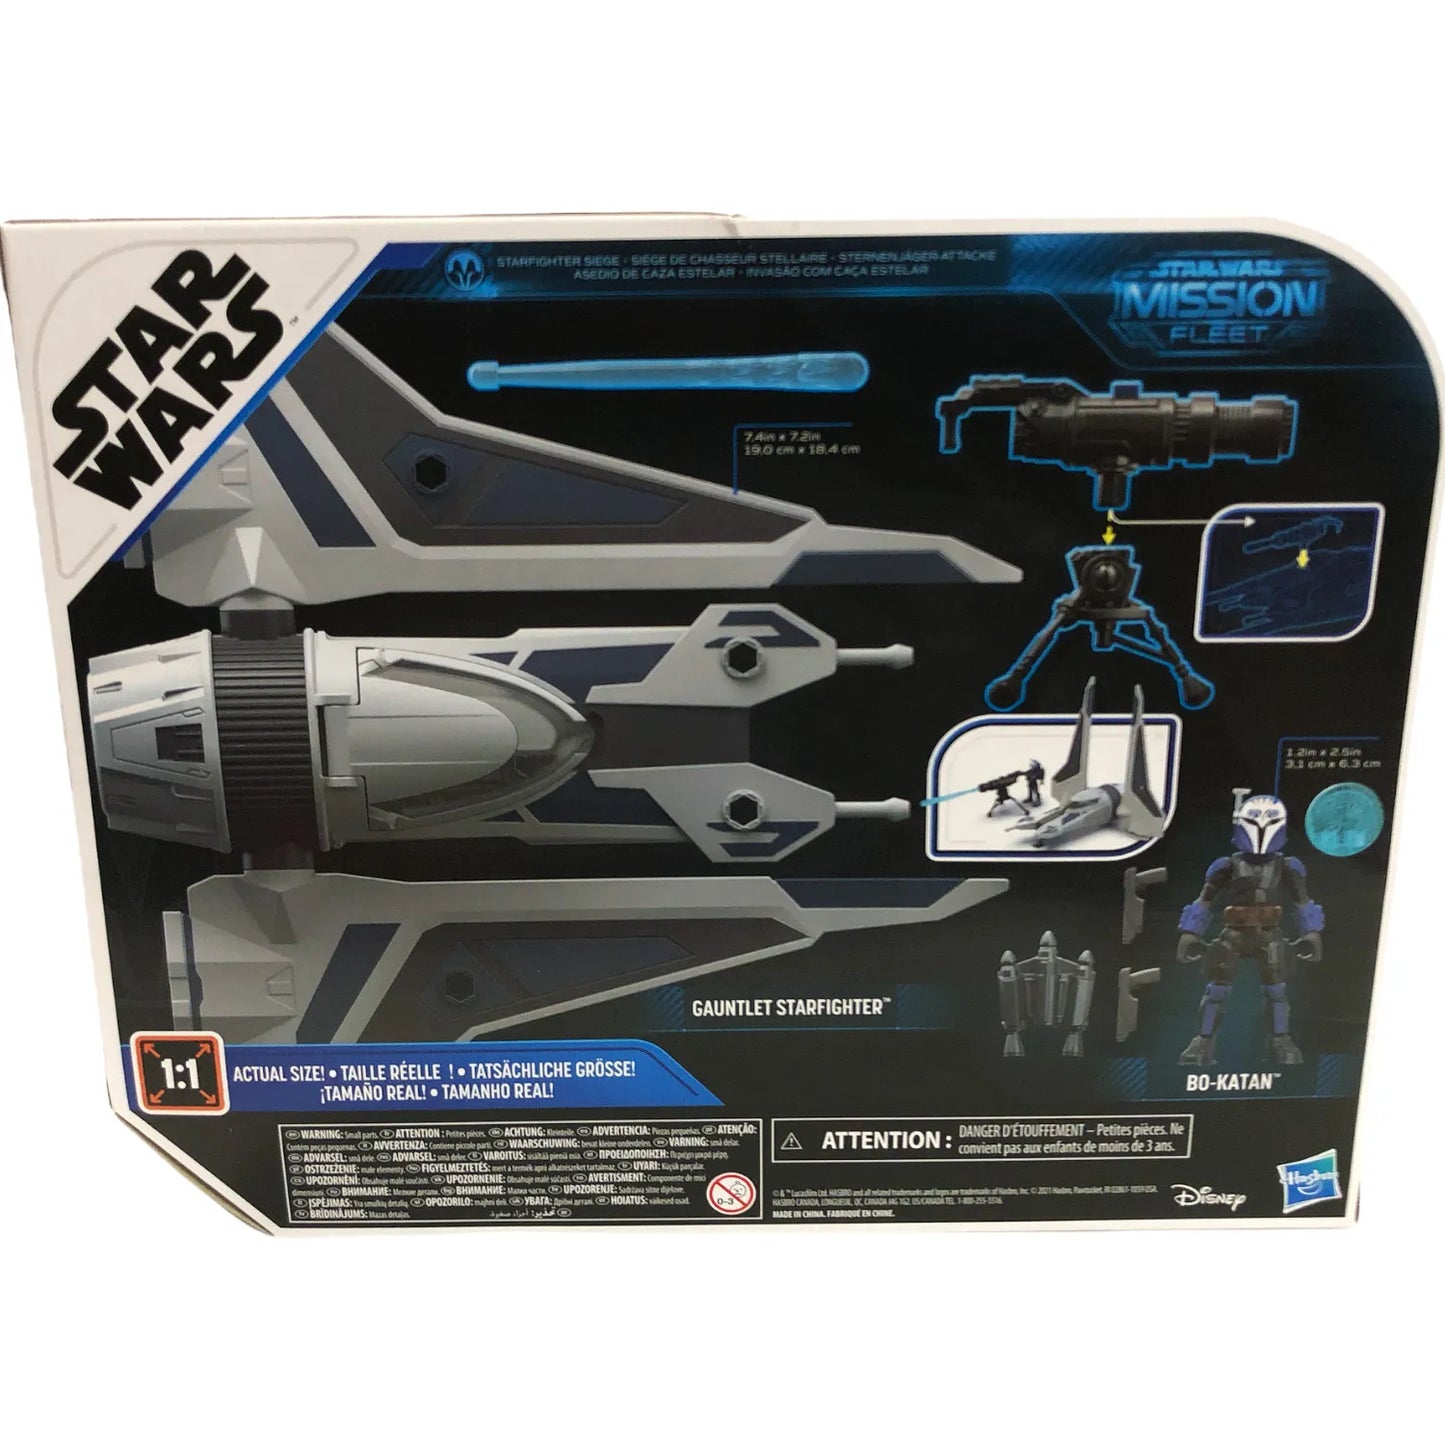 Rear Profile of Star Wars Mission Fleet Medium Sized Action Figure Set w/ Bo Katan and the Gaunlet Starfighter in the box